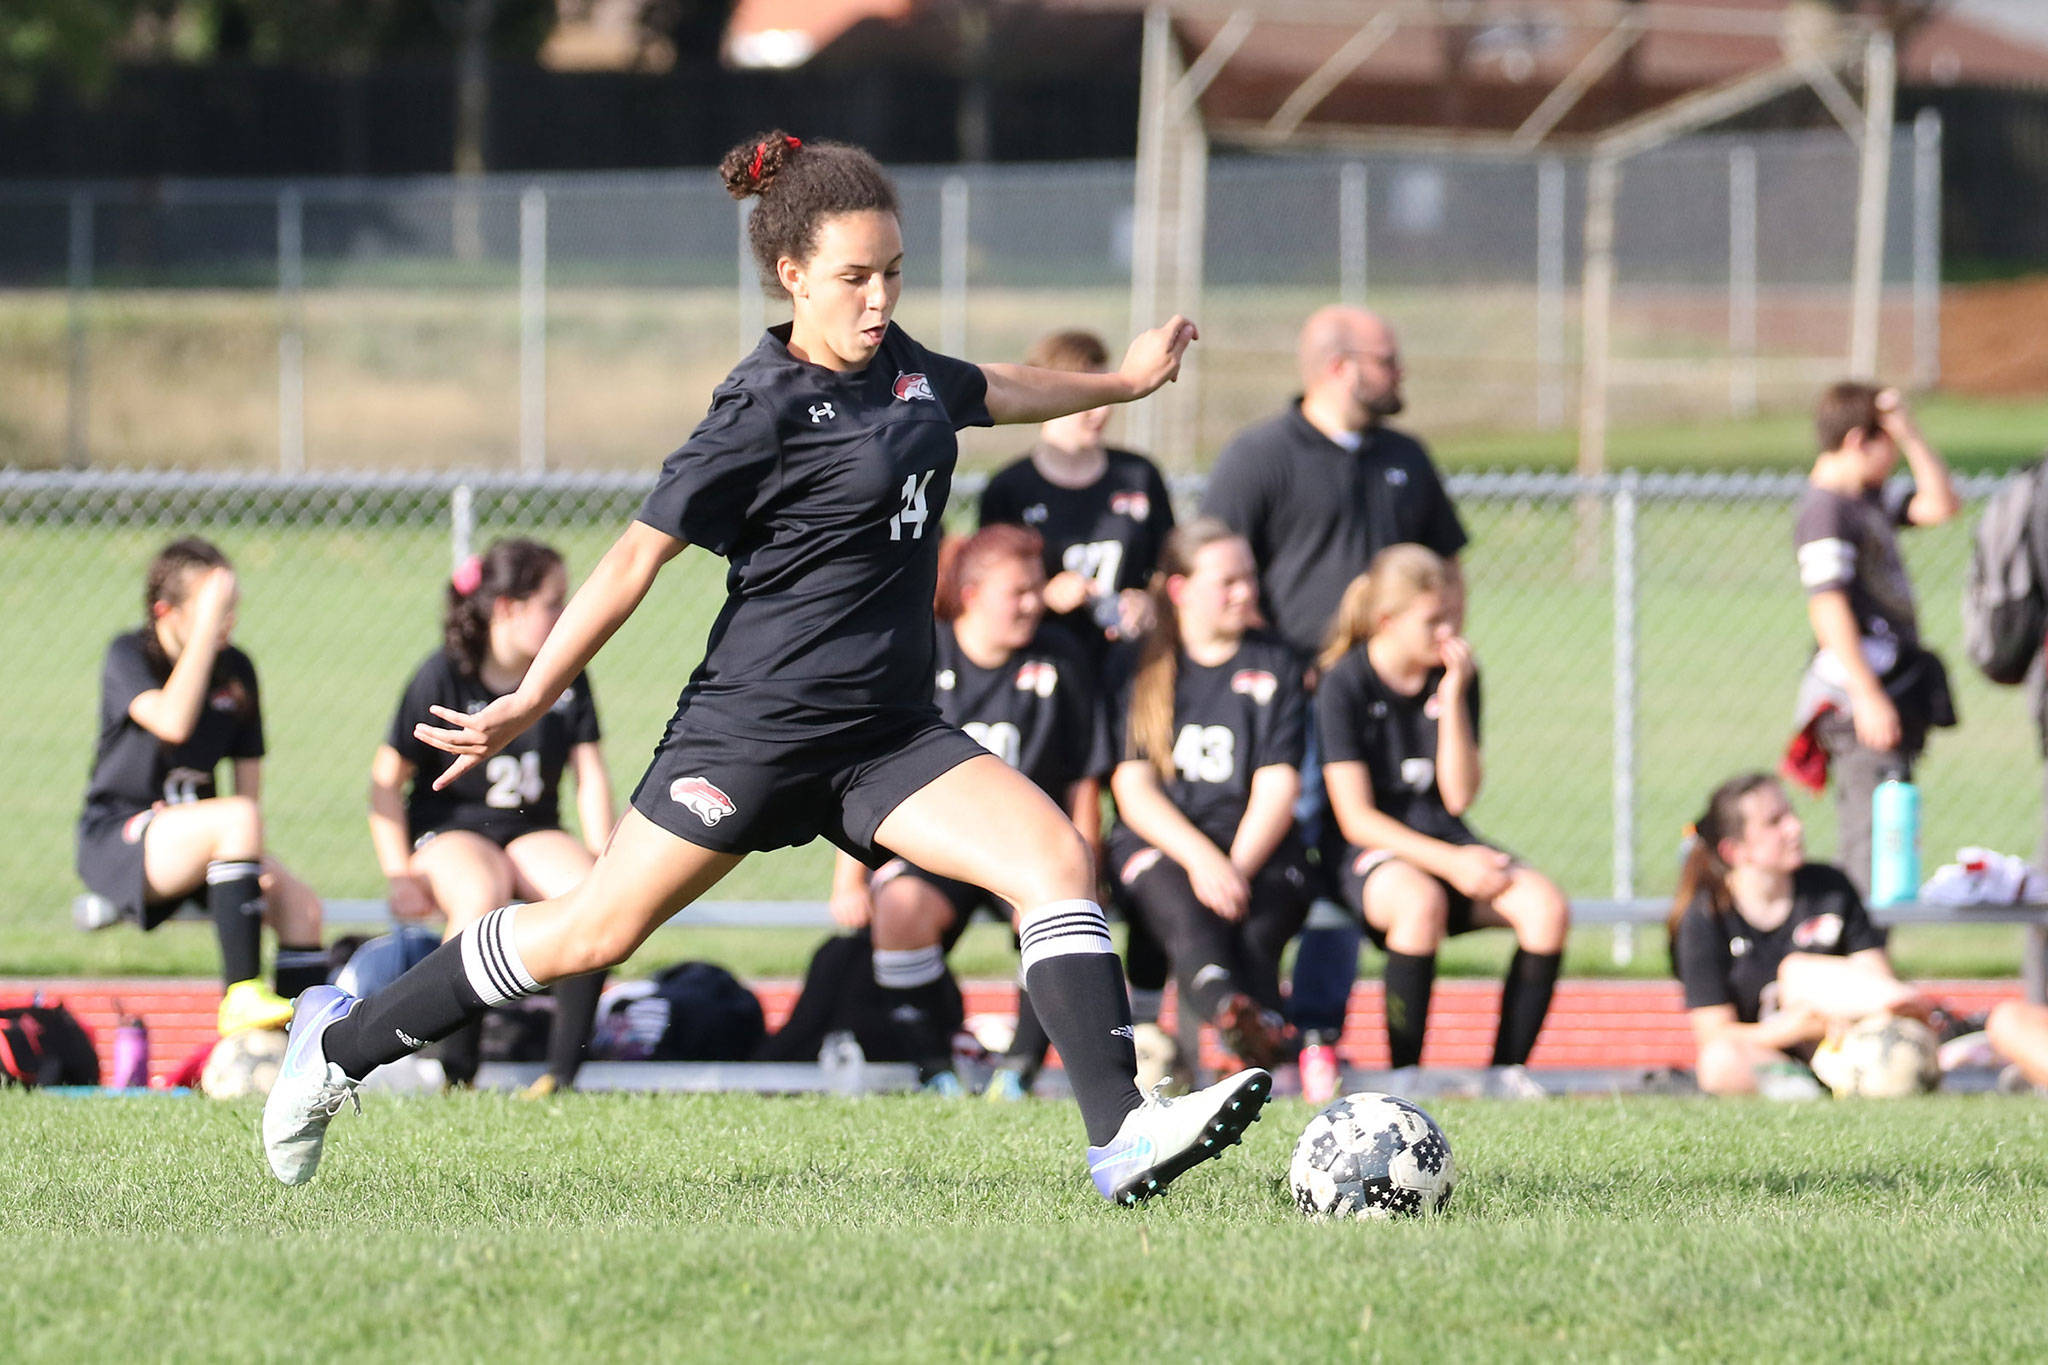 Varsity defender Lily Atkins boots the ball for the Cougars in their match with Conway Thursday.(Photo by John Fisken)